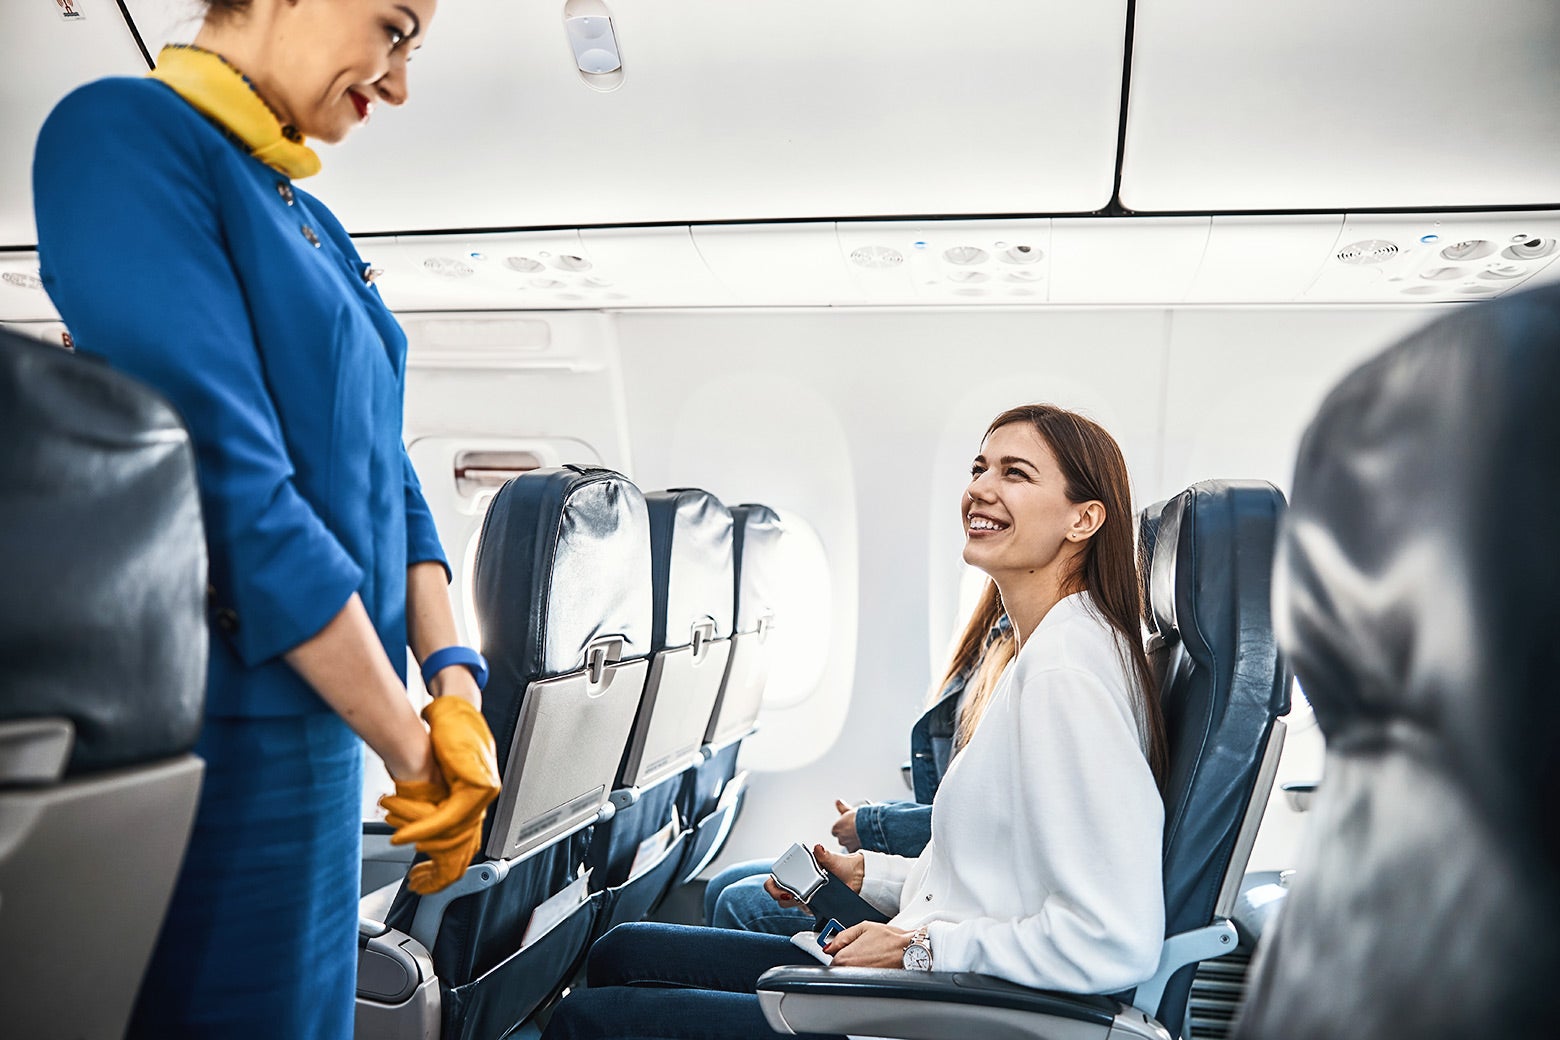 A woman seated in the aisle seat on a plane smiles at the blue-uniformed flight attendant. 